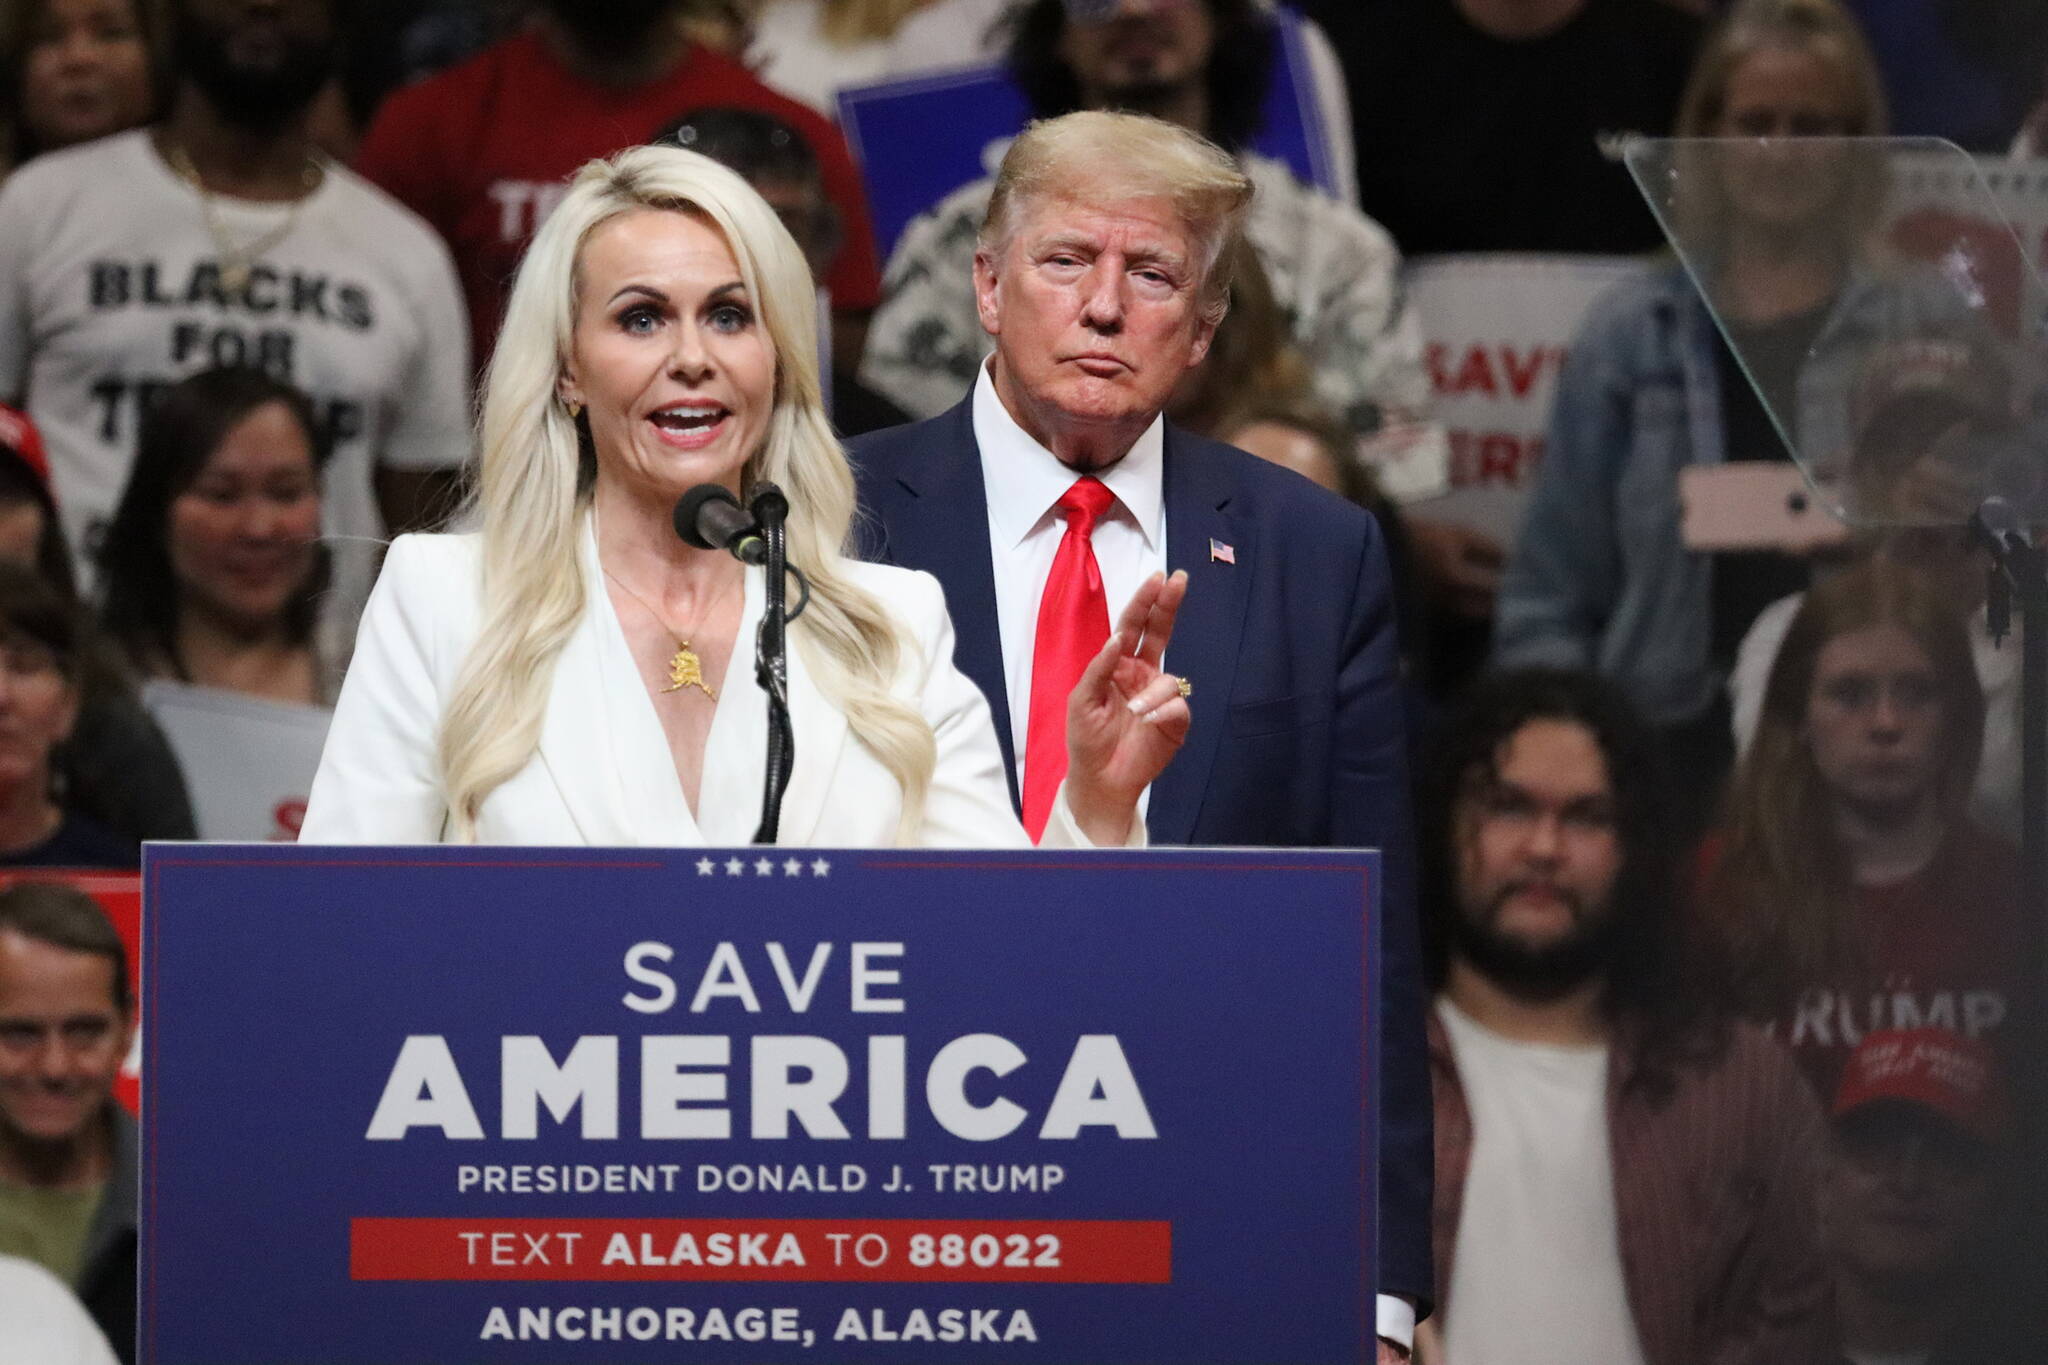 Kelly Tshibaka, former Alaska Department of Administration commissioner and current U.S. Senate candidate, joined former President Donald Trump at a Save America rally held Saturday in Anchorage. Tshibaka was one of two Republican congressional candidates to join Trump. (Mark Sabbatini / Juneau Empire)